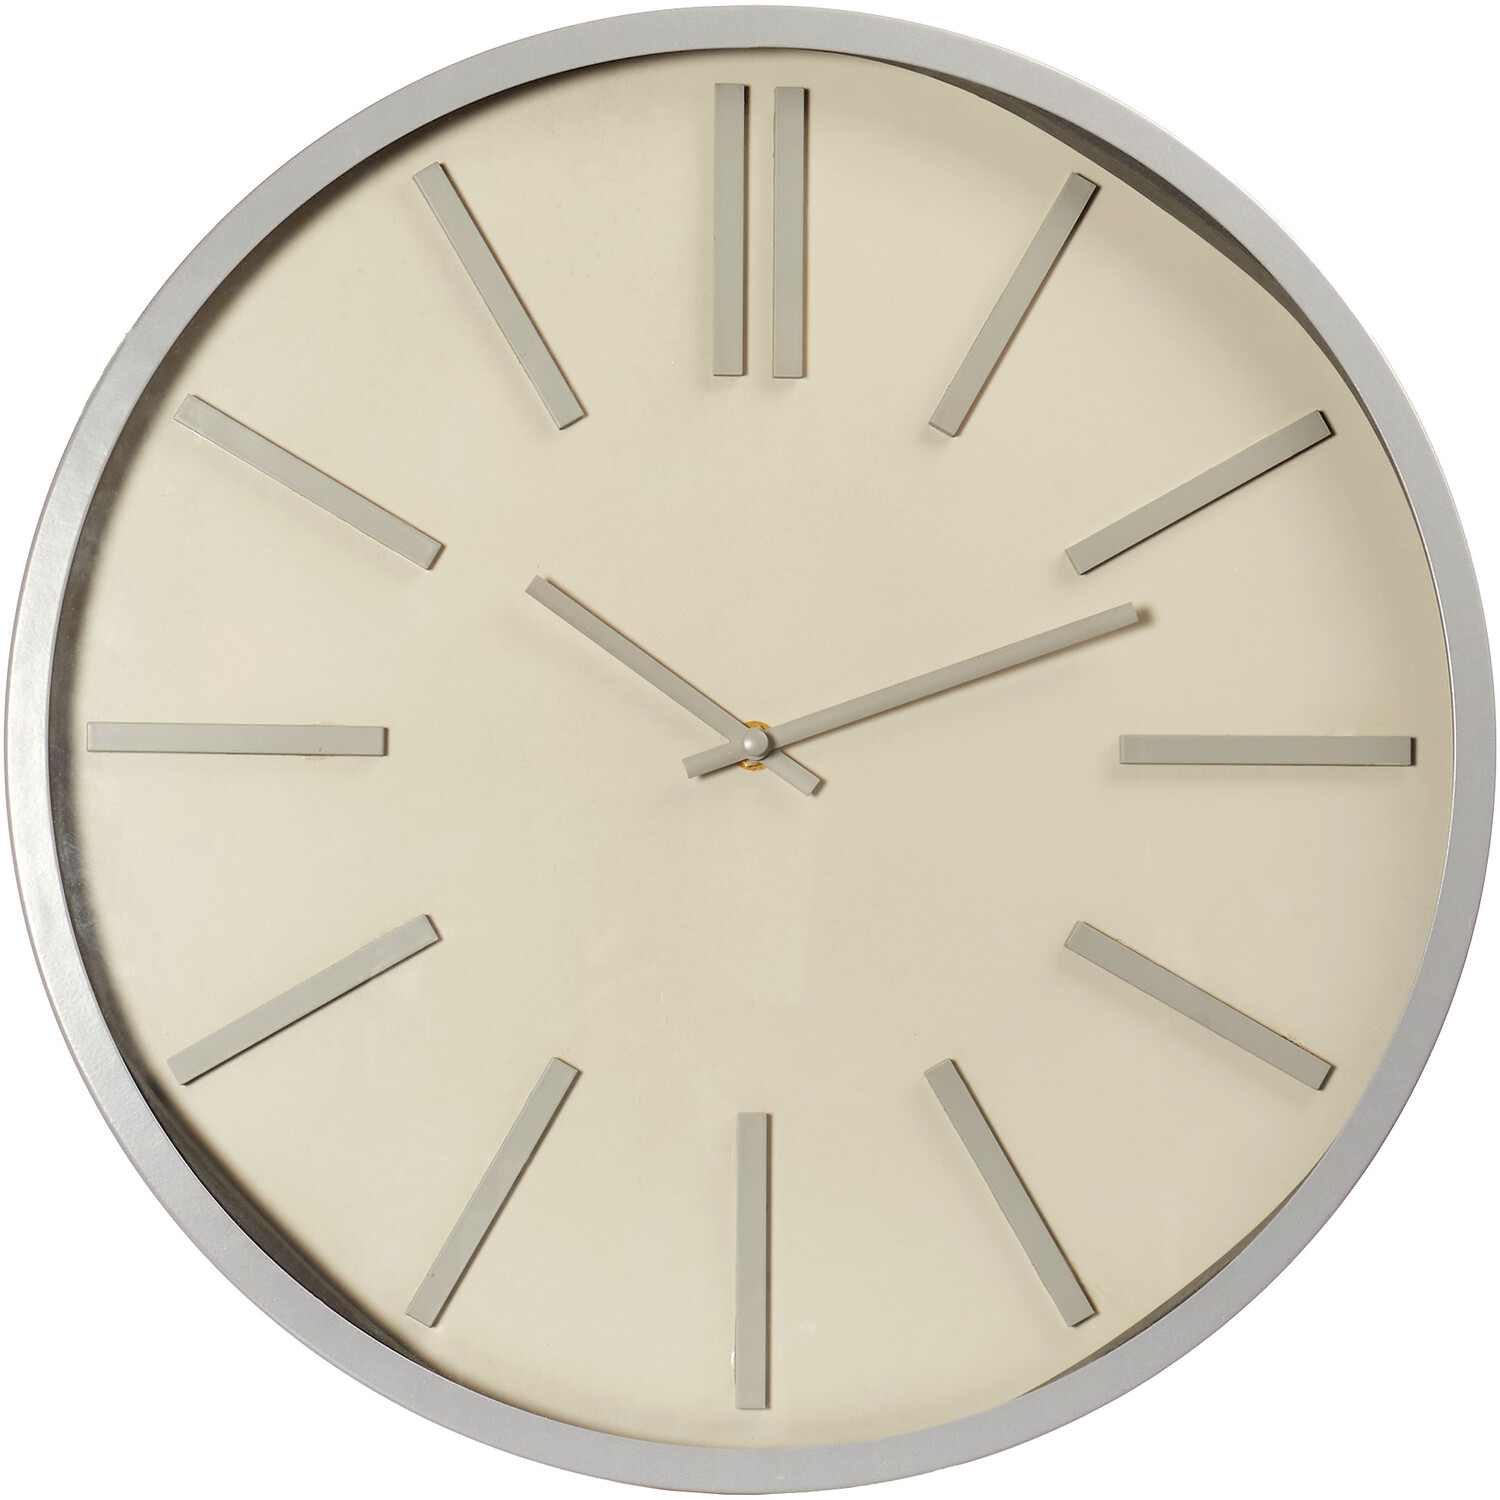 Nordic Wall Clock - Neutral Image 1